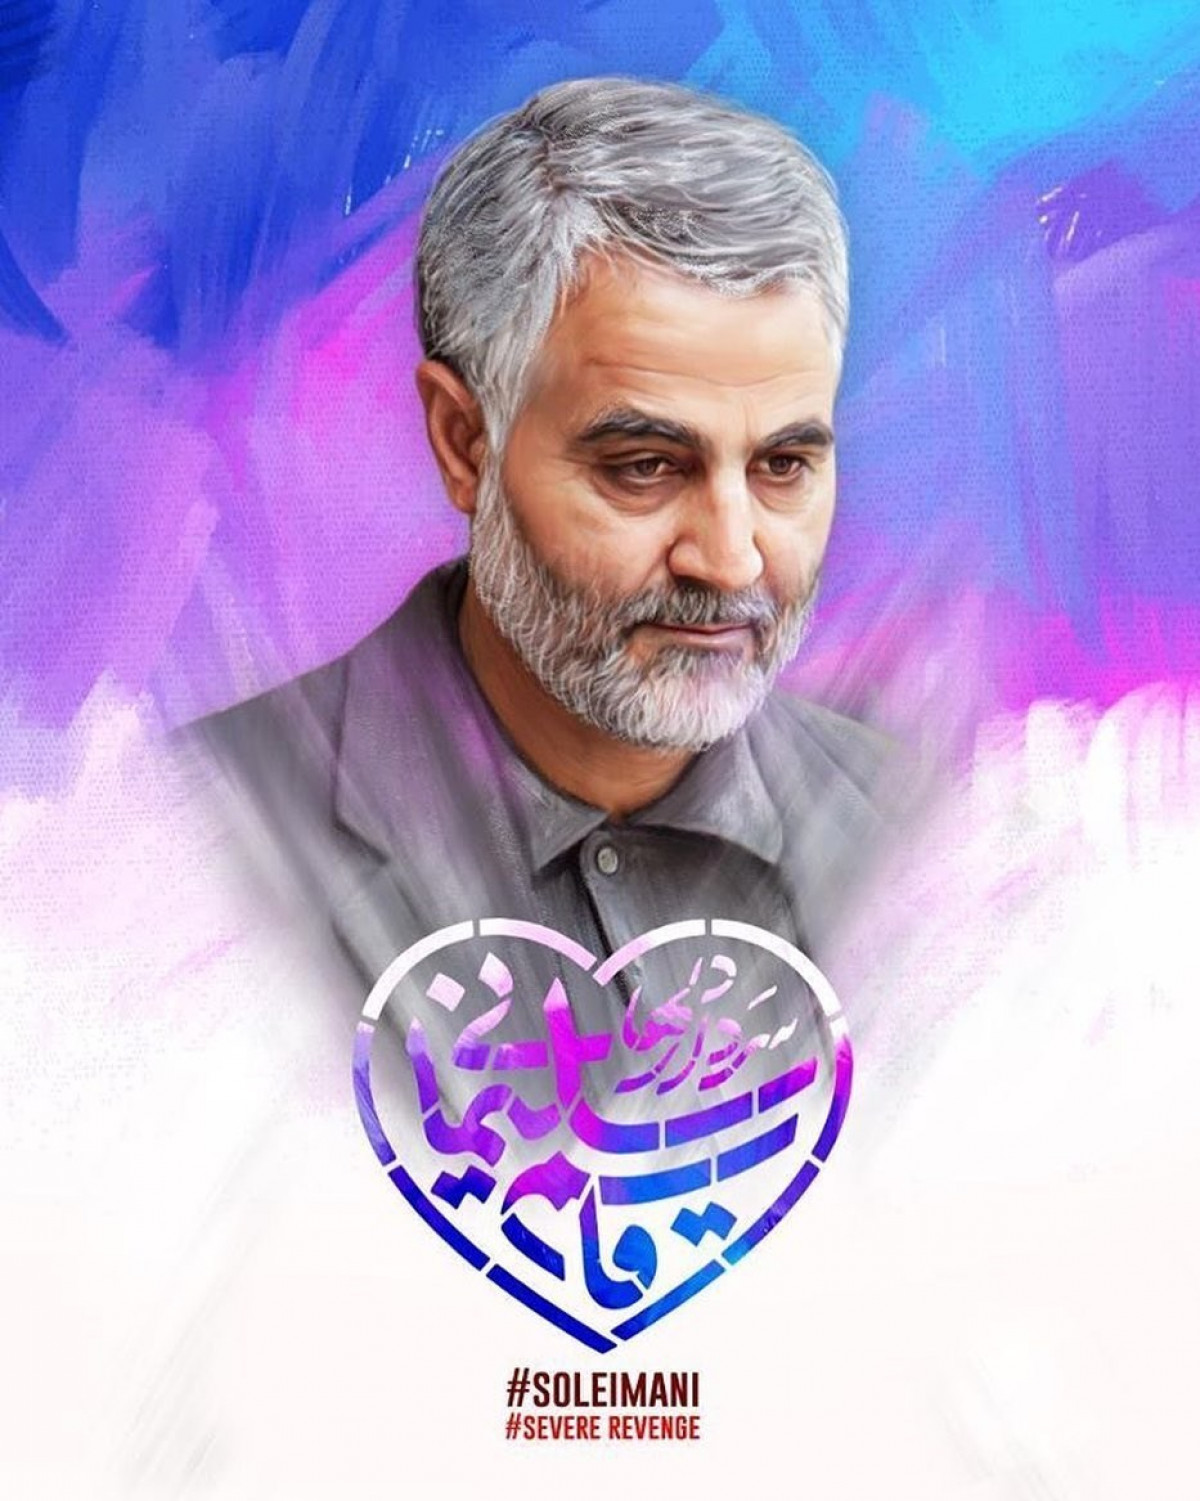 A love for Sardar martyr Qassem Soleimani, who was the peace of a nation